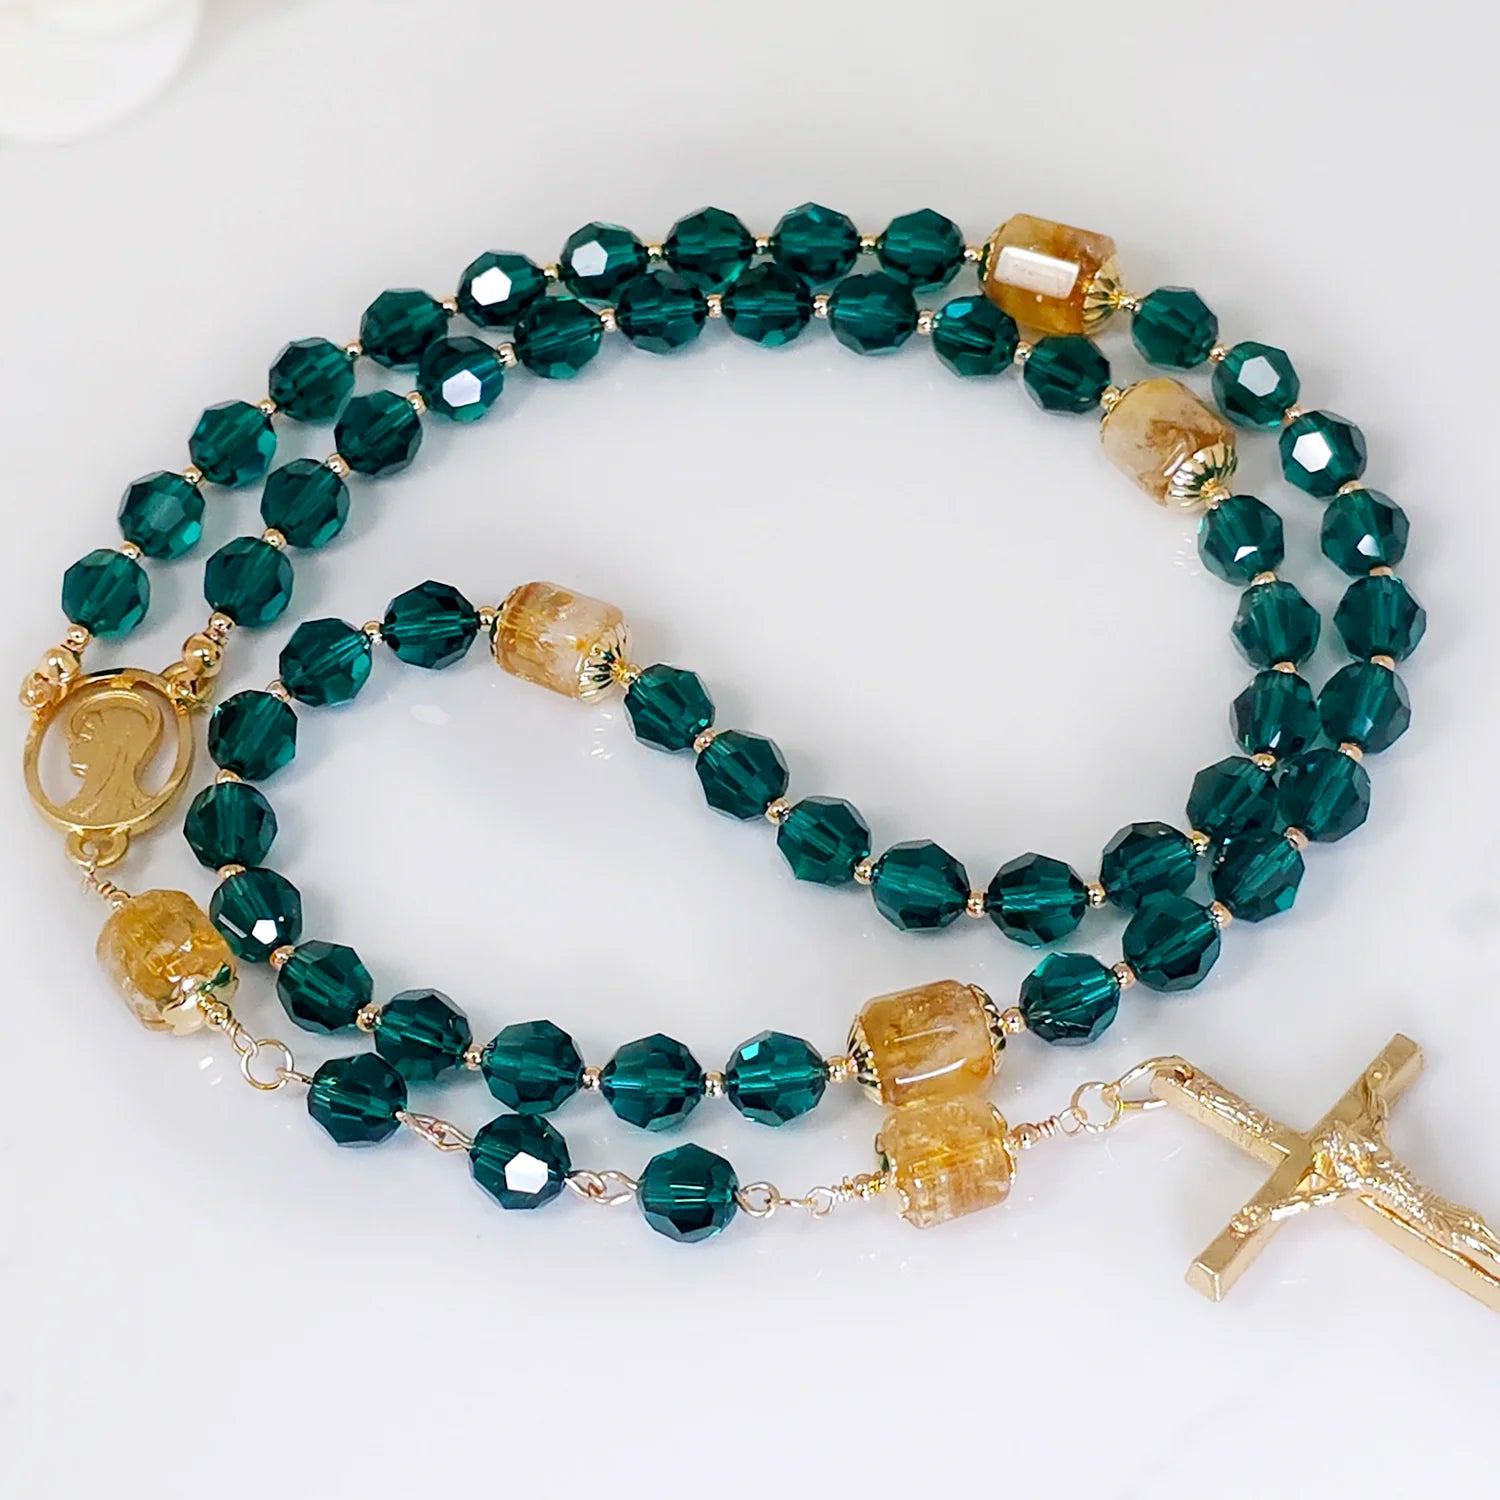 Five-decade rosary showcasing the deep hue of emerald beads, complemented by Golden Citrine accents, set on a white table.